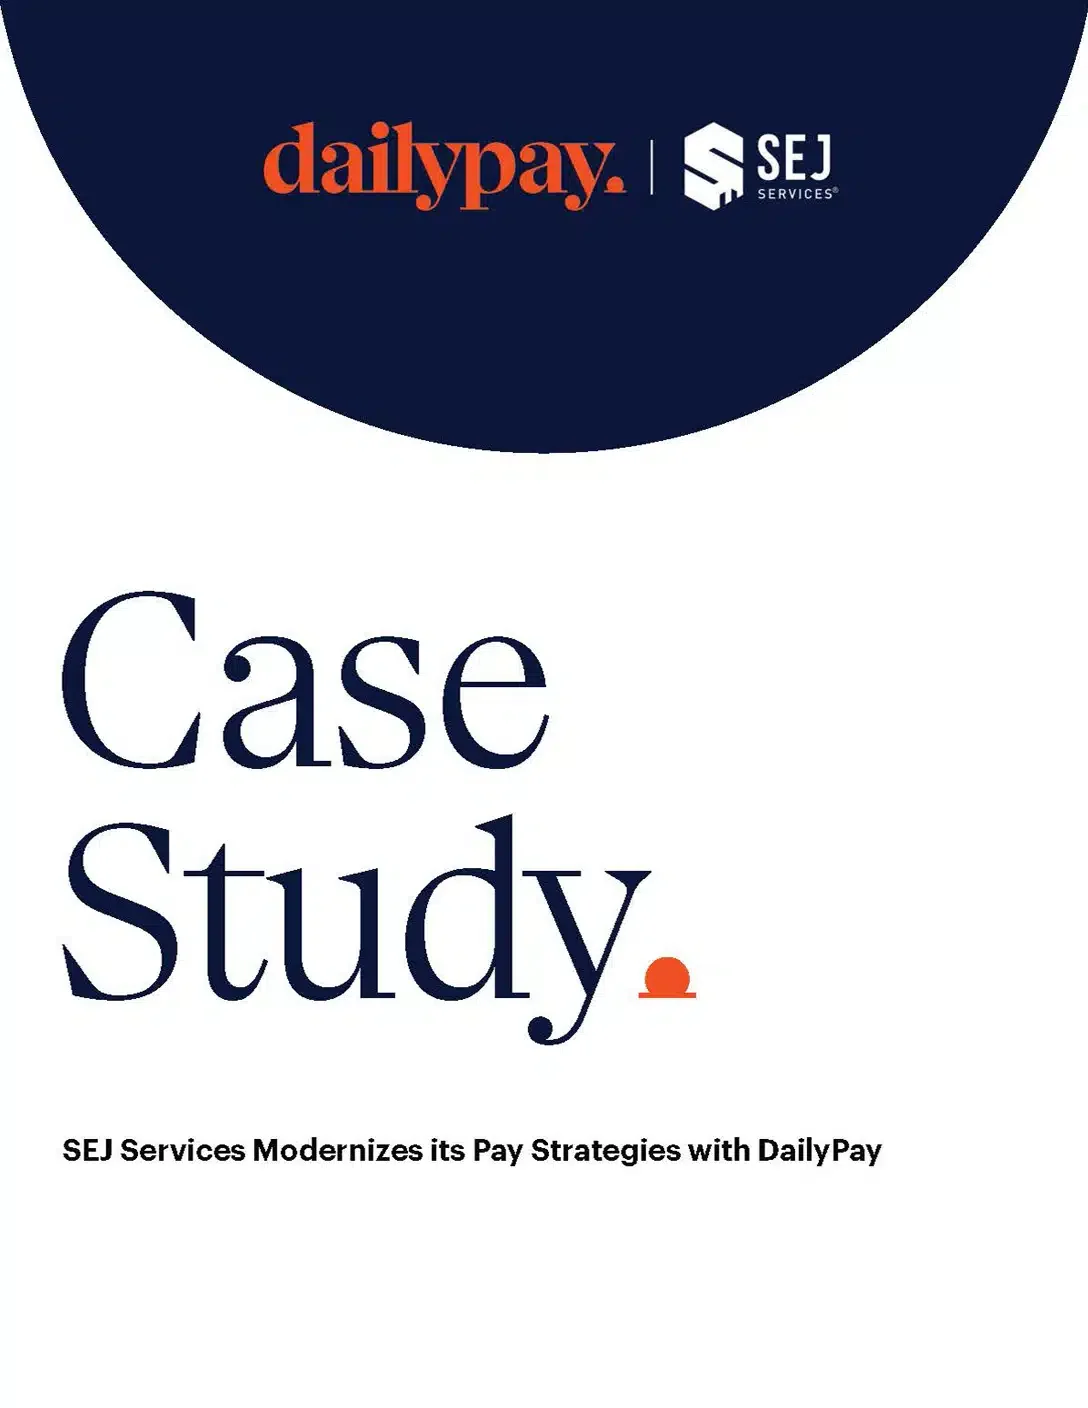 Cover page of a document titled "Case Study: SEJ Services Modernizes its Pay Strategies with DailyPay," featuring logos of DailyPay and SEJ Services.